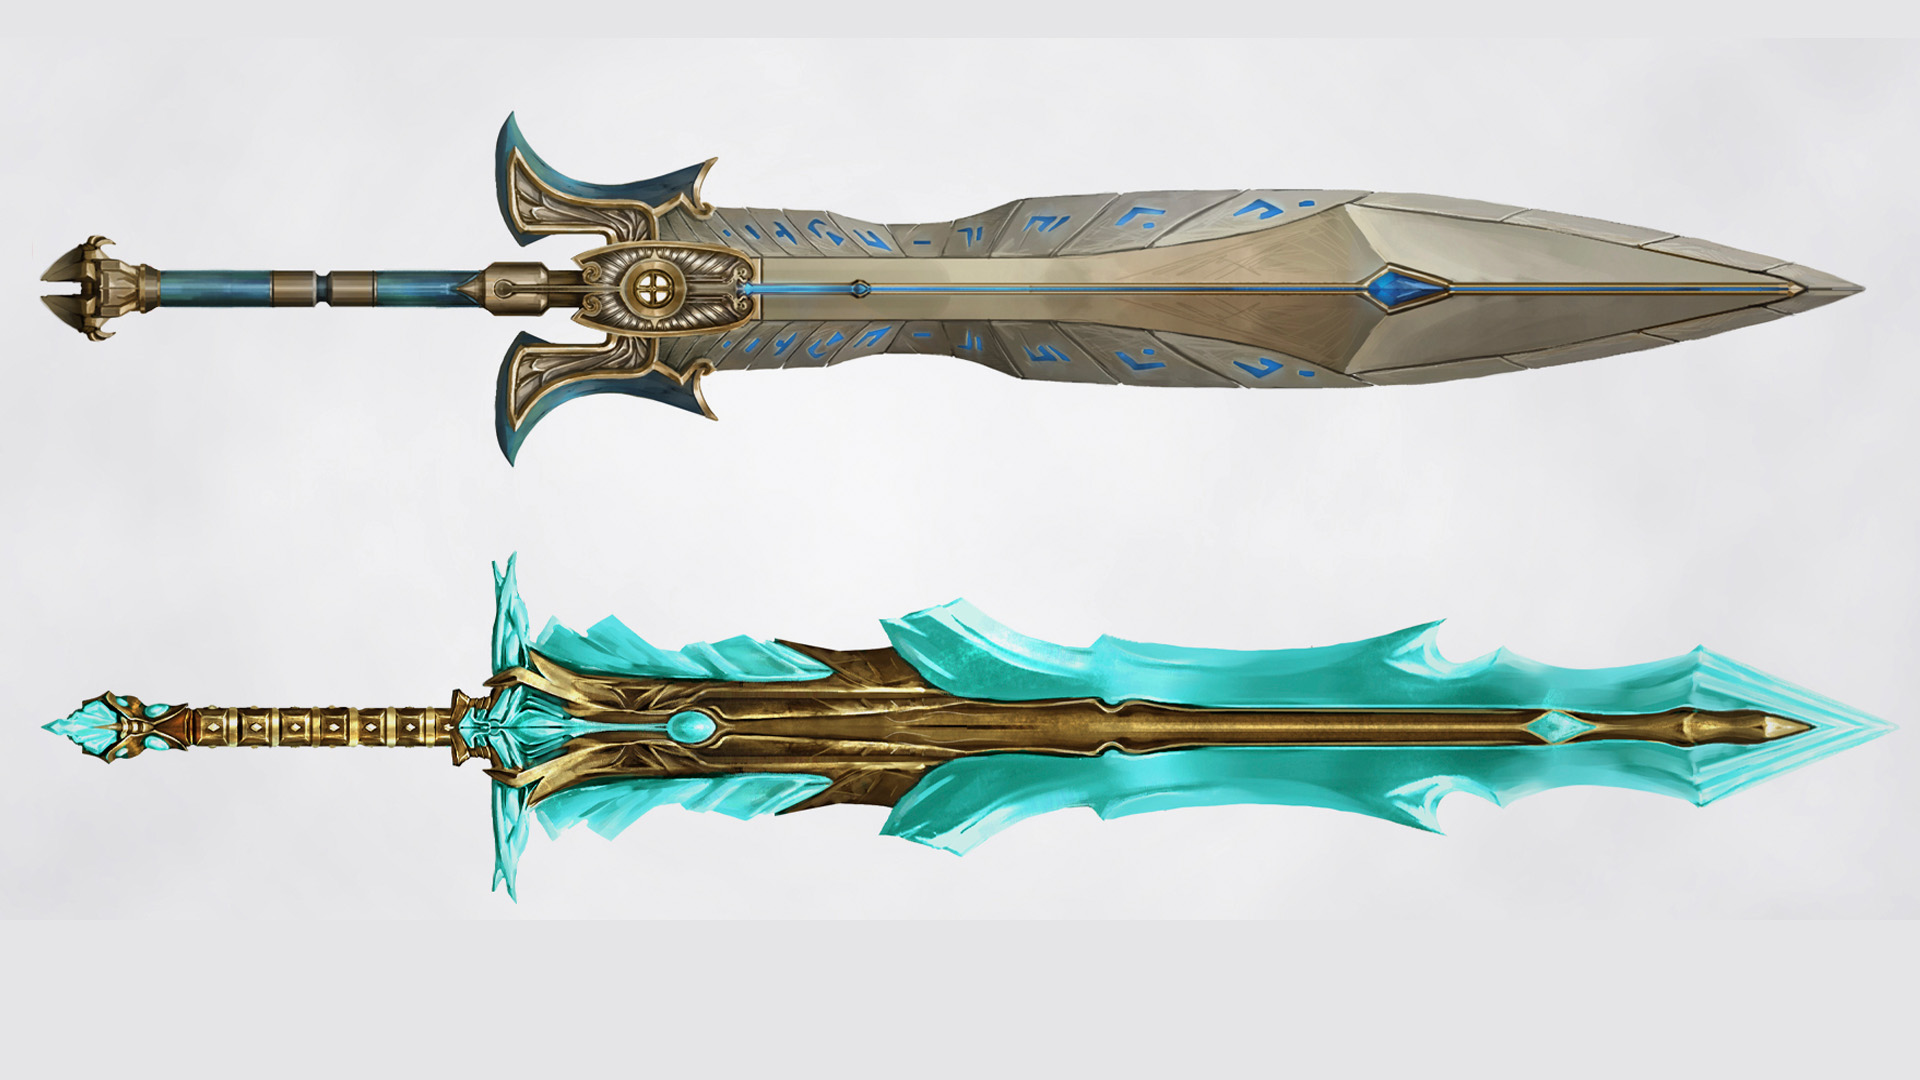 PNW] BEST SWORD IN PROJECT NEW WORLD